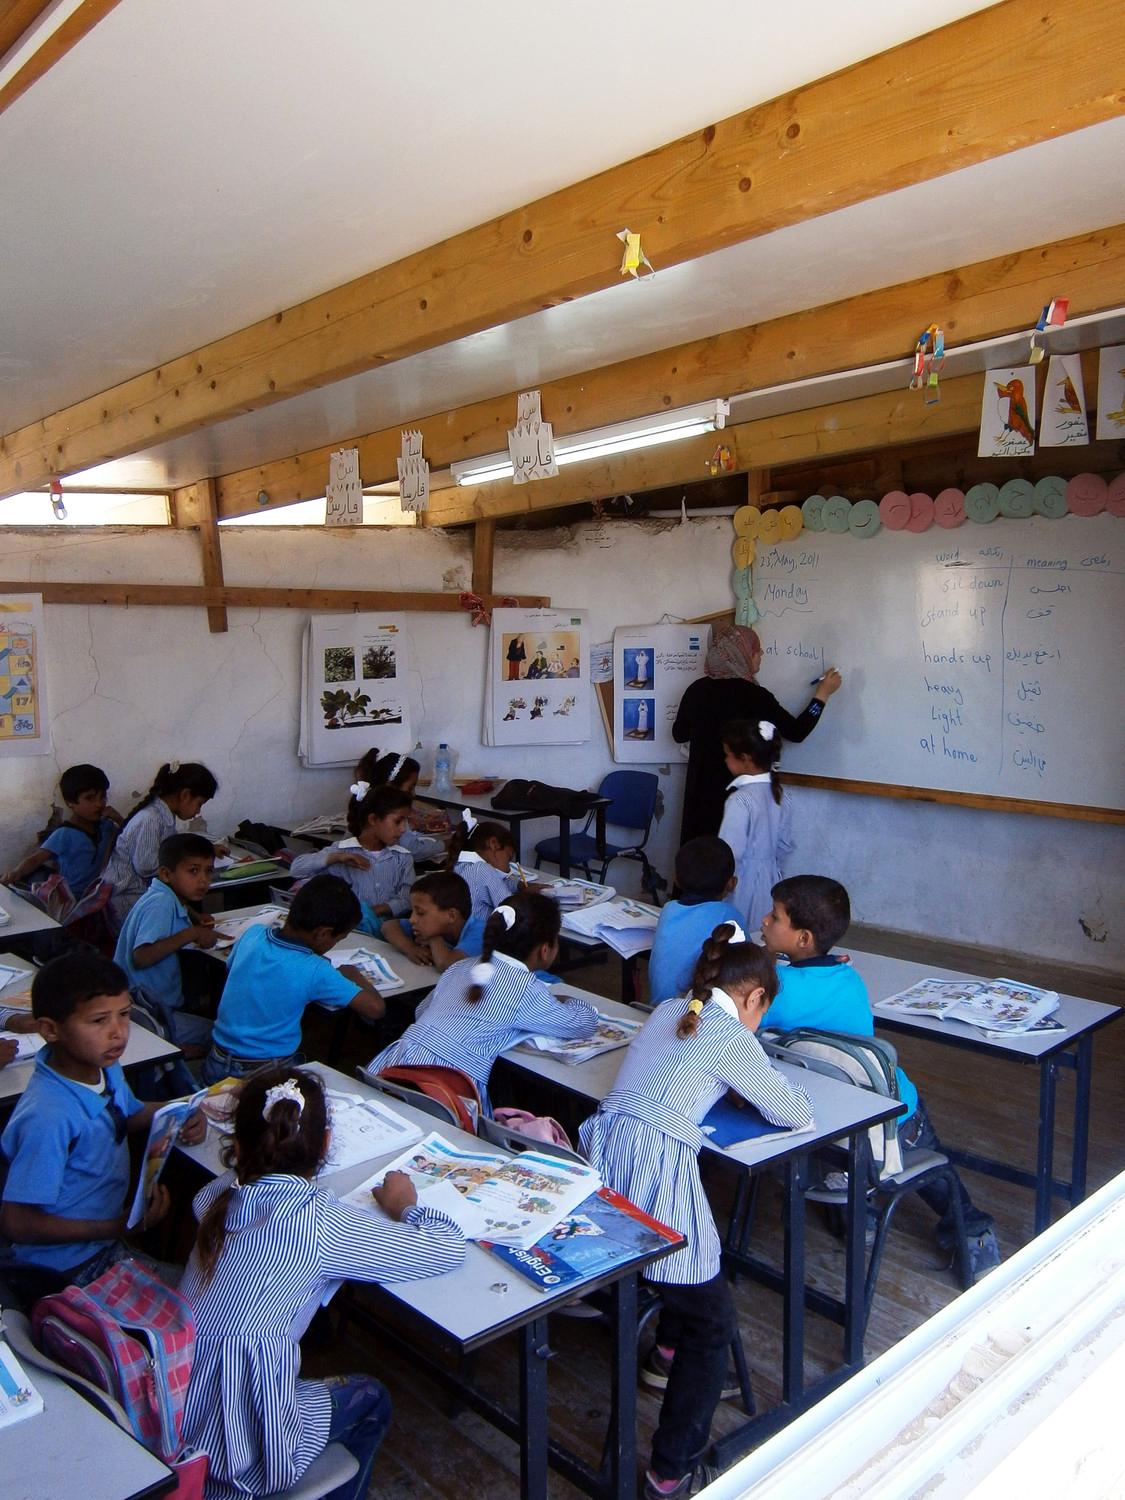 A classroom during school lesson